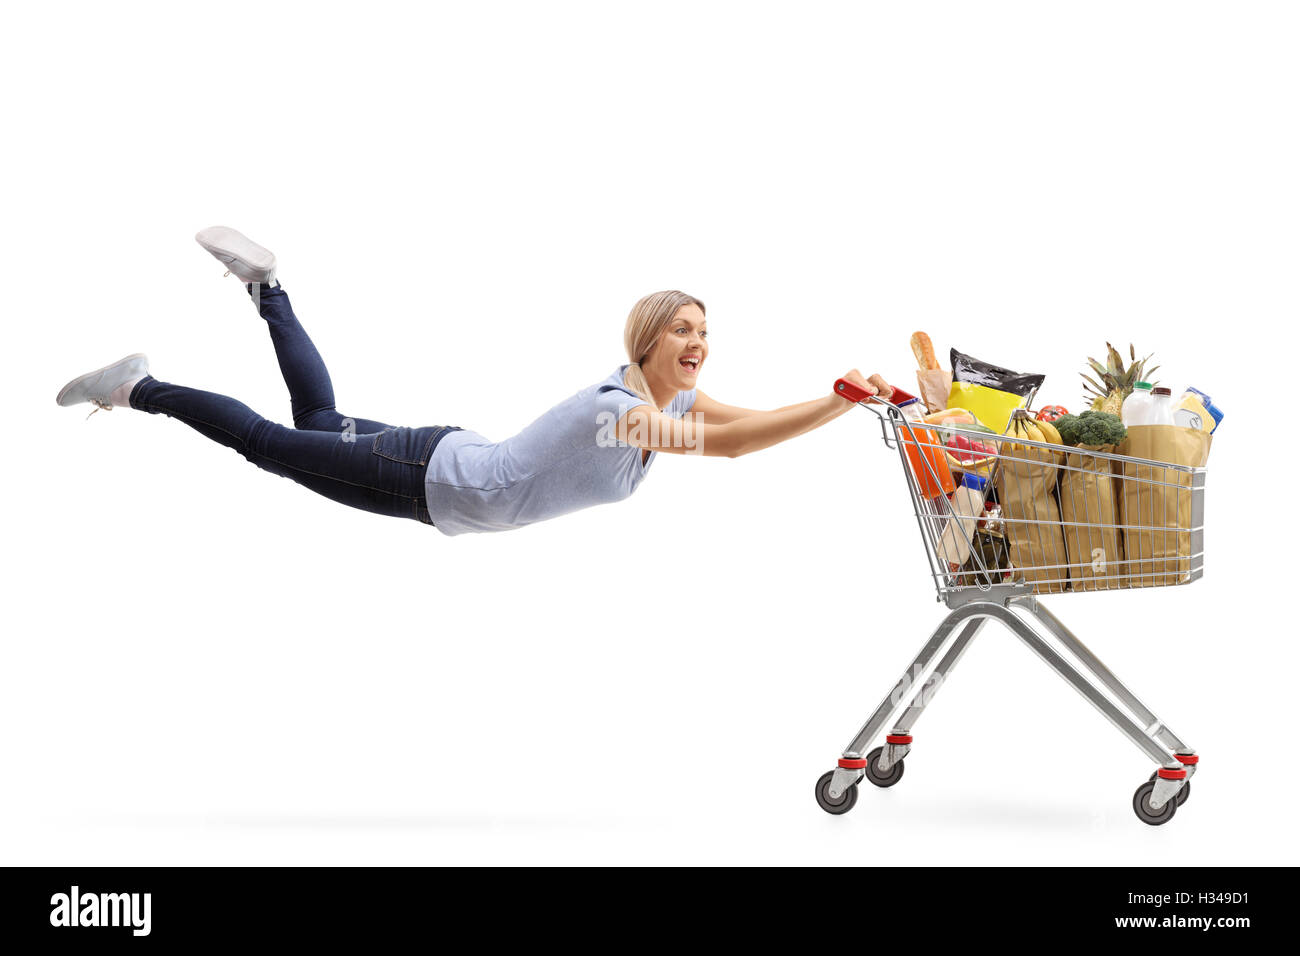 Happy woman being pulled by a shopping cart full of groceries isolated on white background Stock Photo